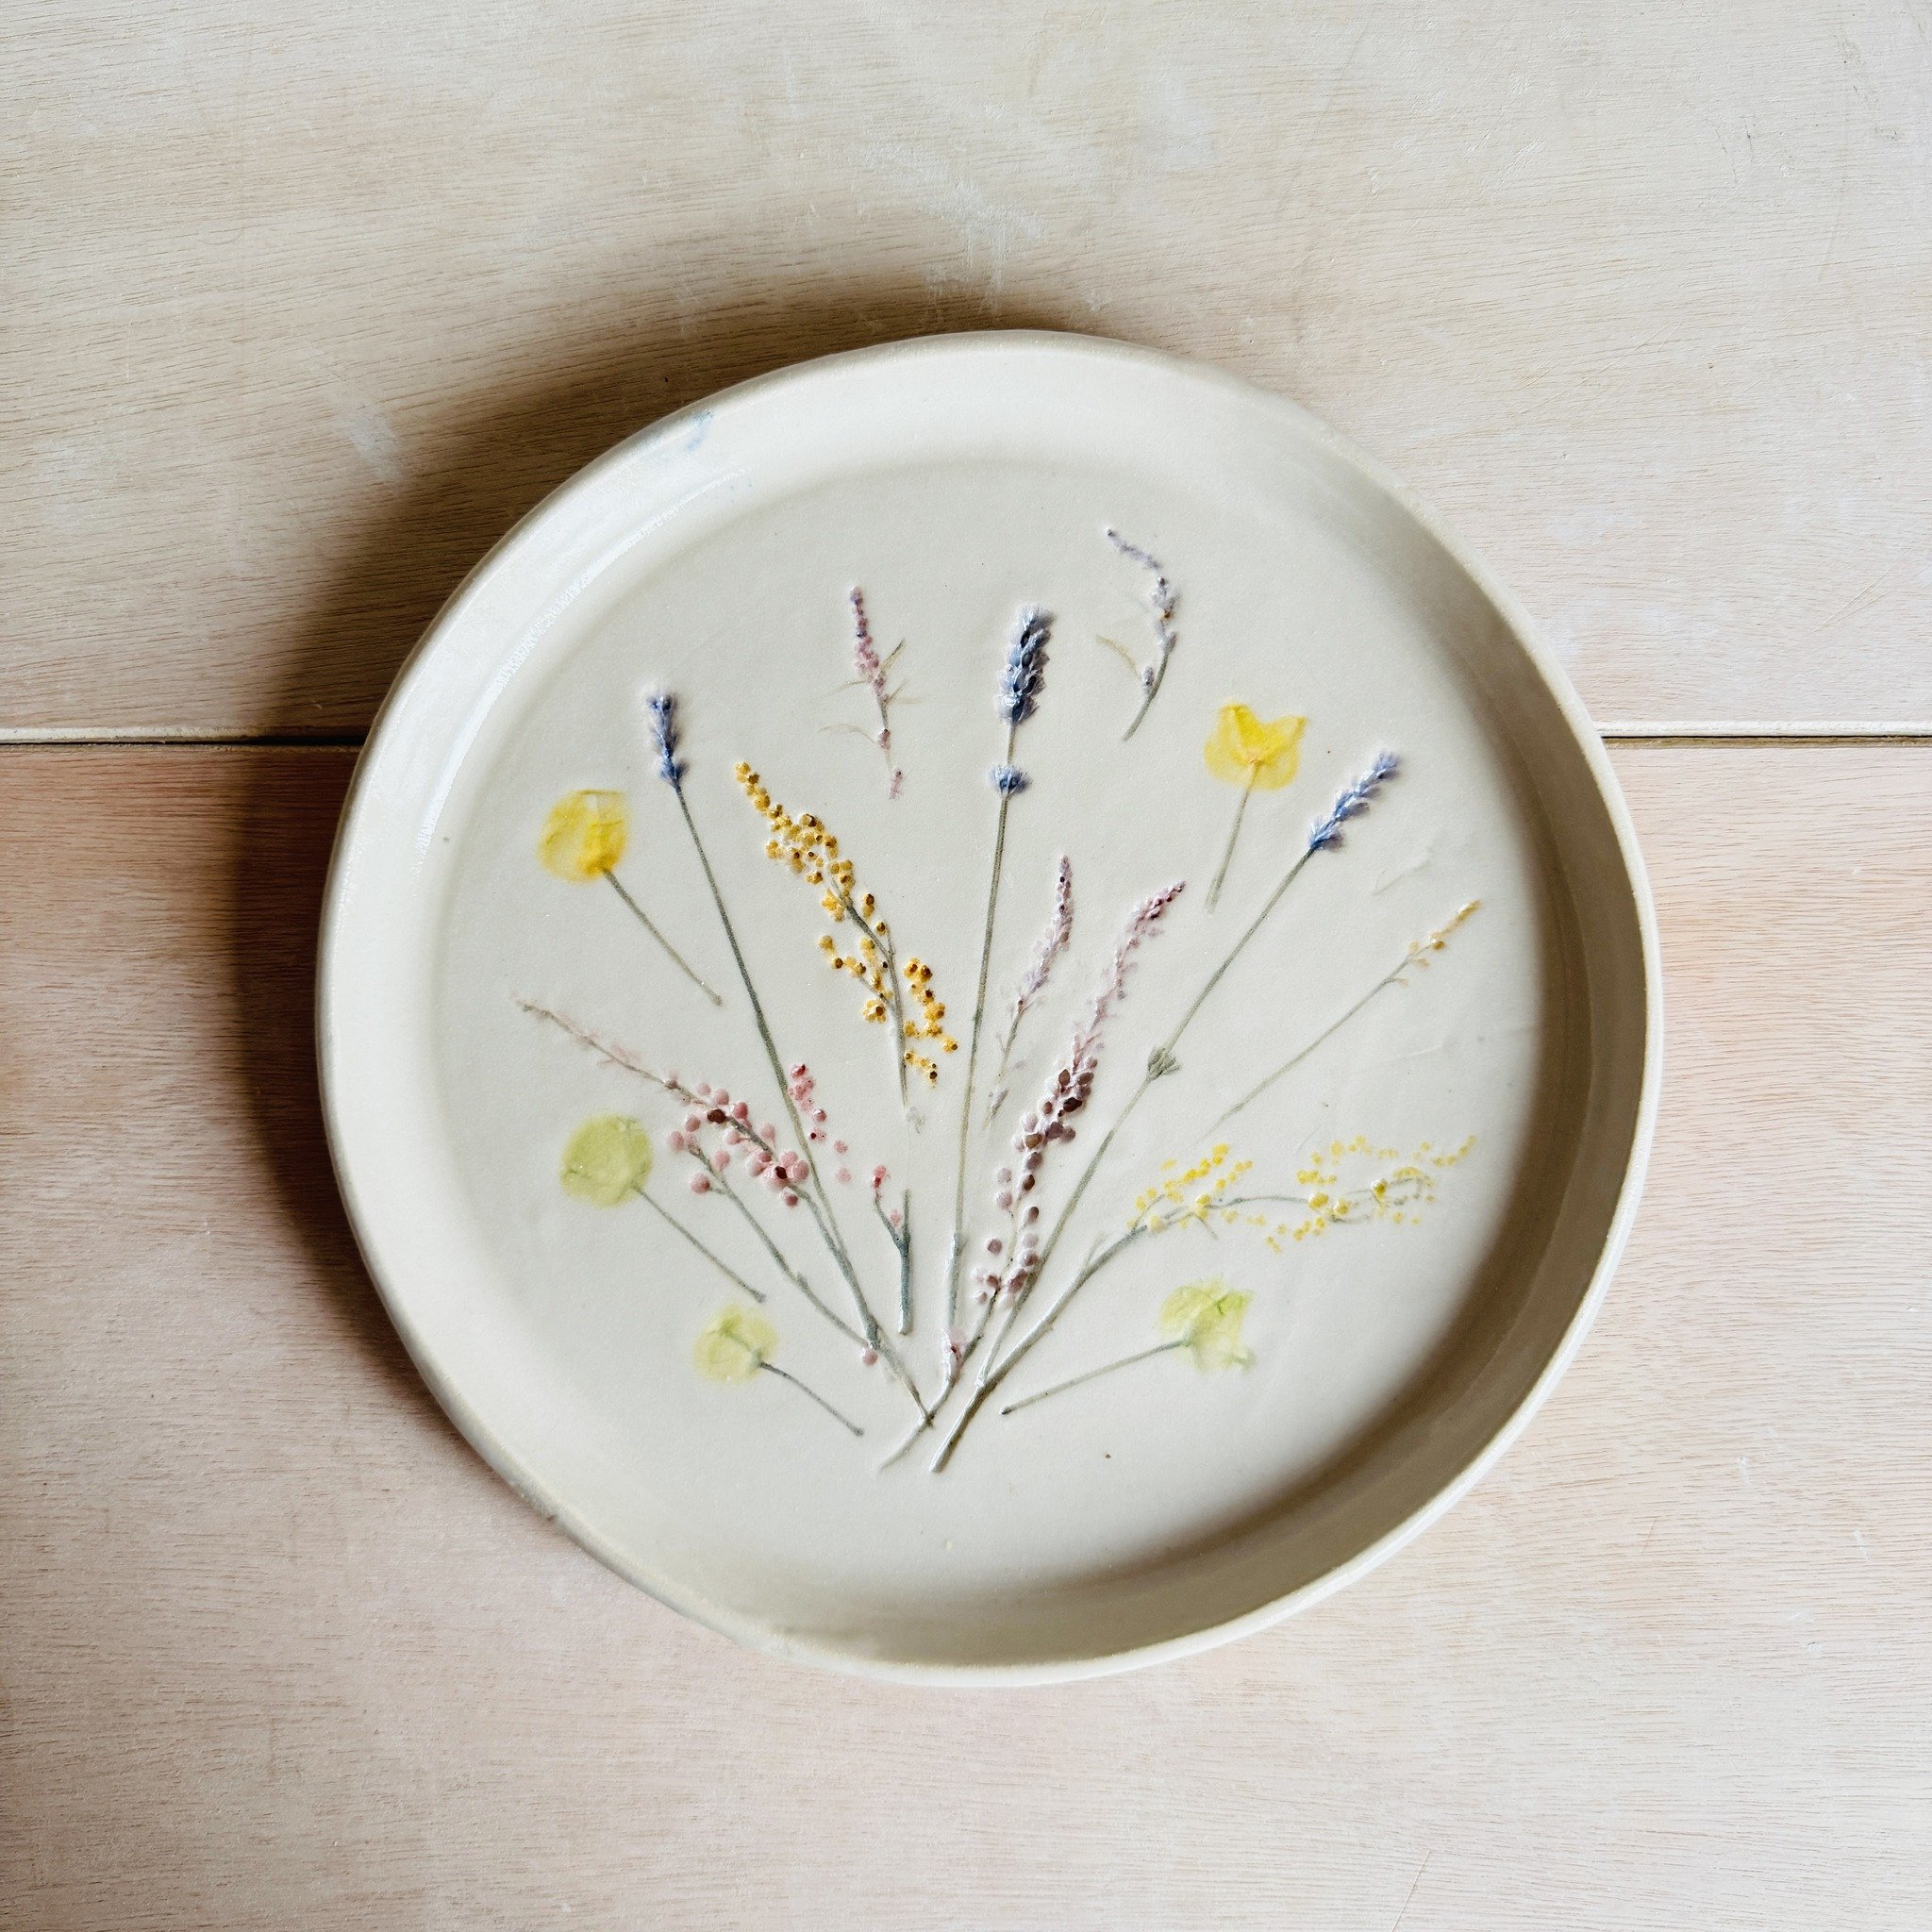 A &quot;welcome spring&quot; plate to celebrate the season's spirit, crafted by Liz (@lizziefduke) 
during our adult weekly classes.

#plate #platter #ceramic #mothersday #potterydemo #potterytutorial #potteryrworkshop #clay #handmade #chichester #se